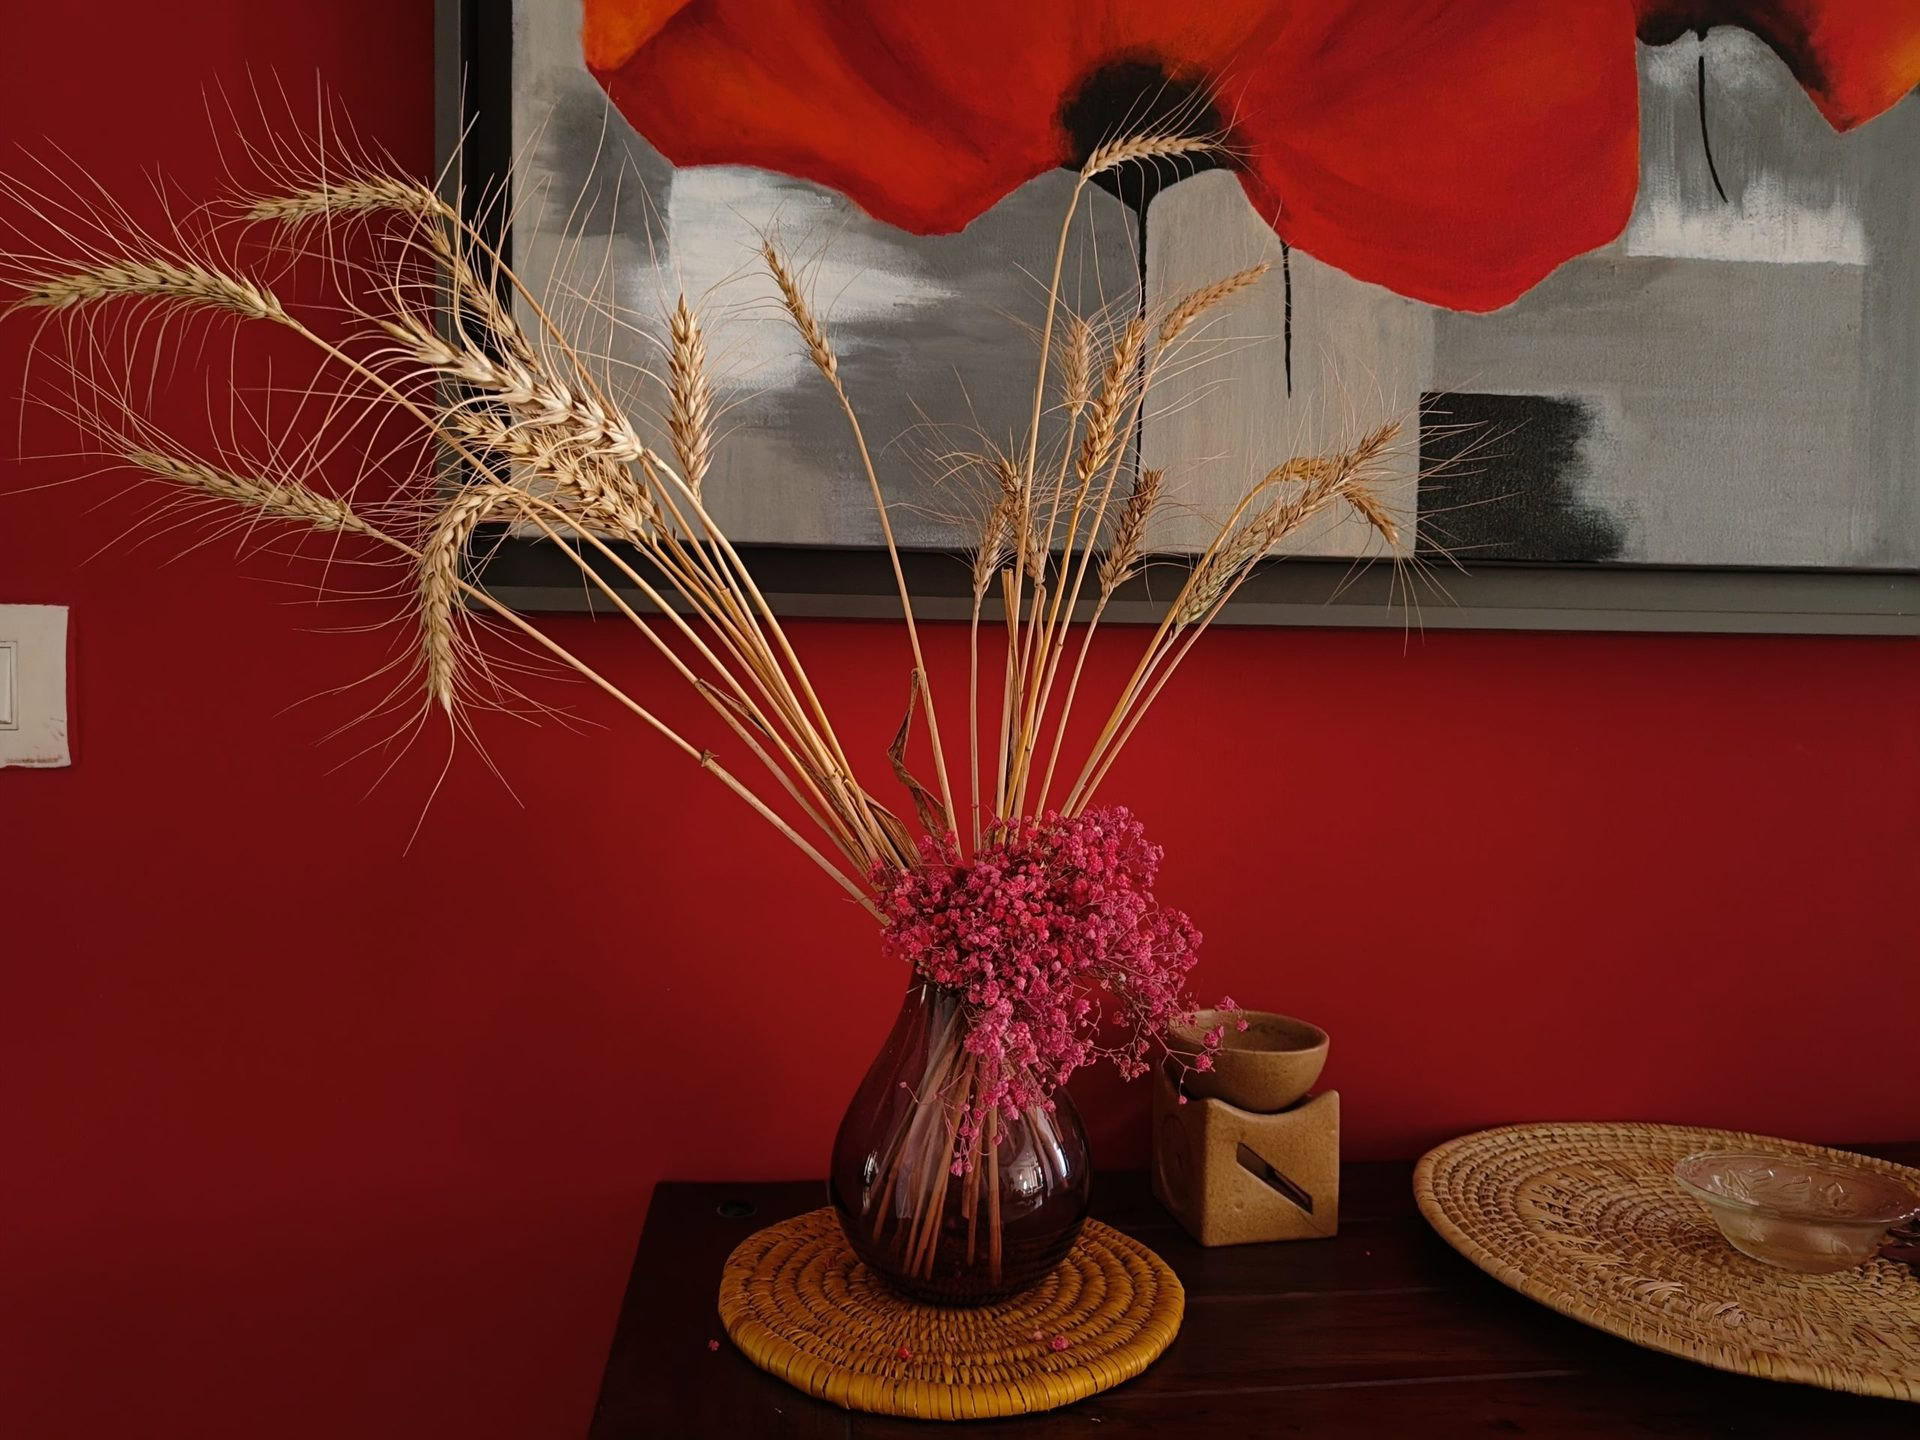 OnePlus 10R camera sample low light indoor glass vase on a table with grasses and dried flowers, against a red wall.